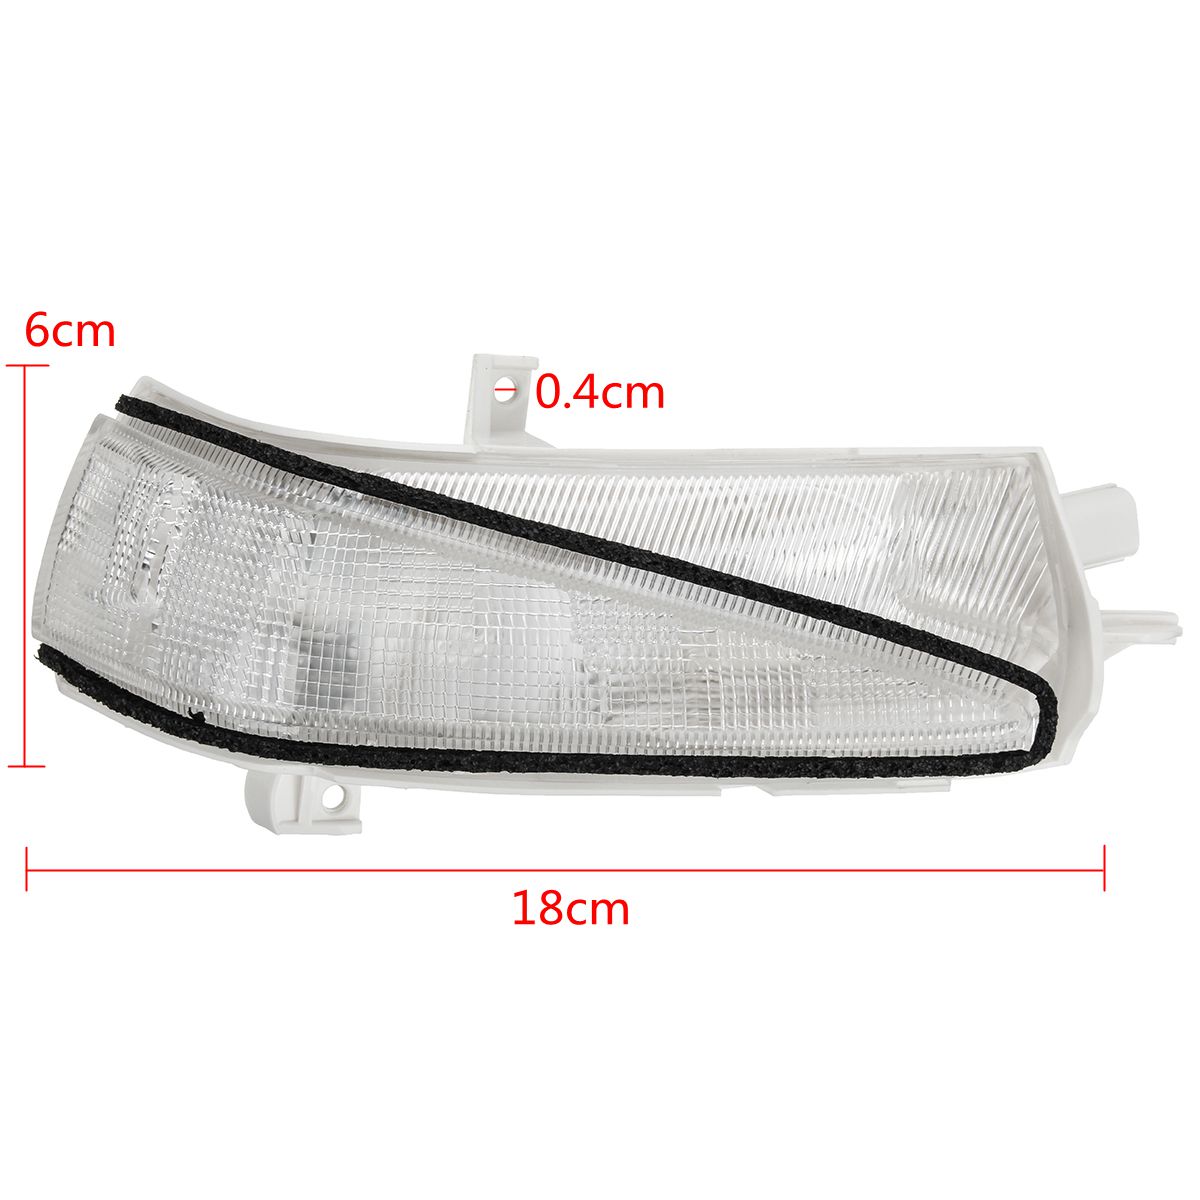 Right-Rearview-Mirror-Side-Turn-Car-Lights-Amber-LED-For-Honda-Civic-2006-2011-1539293